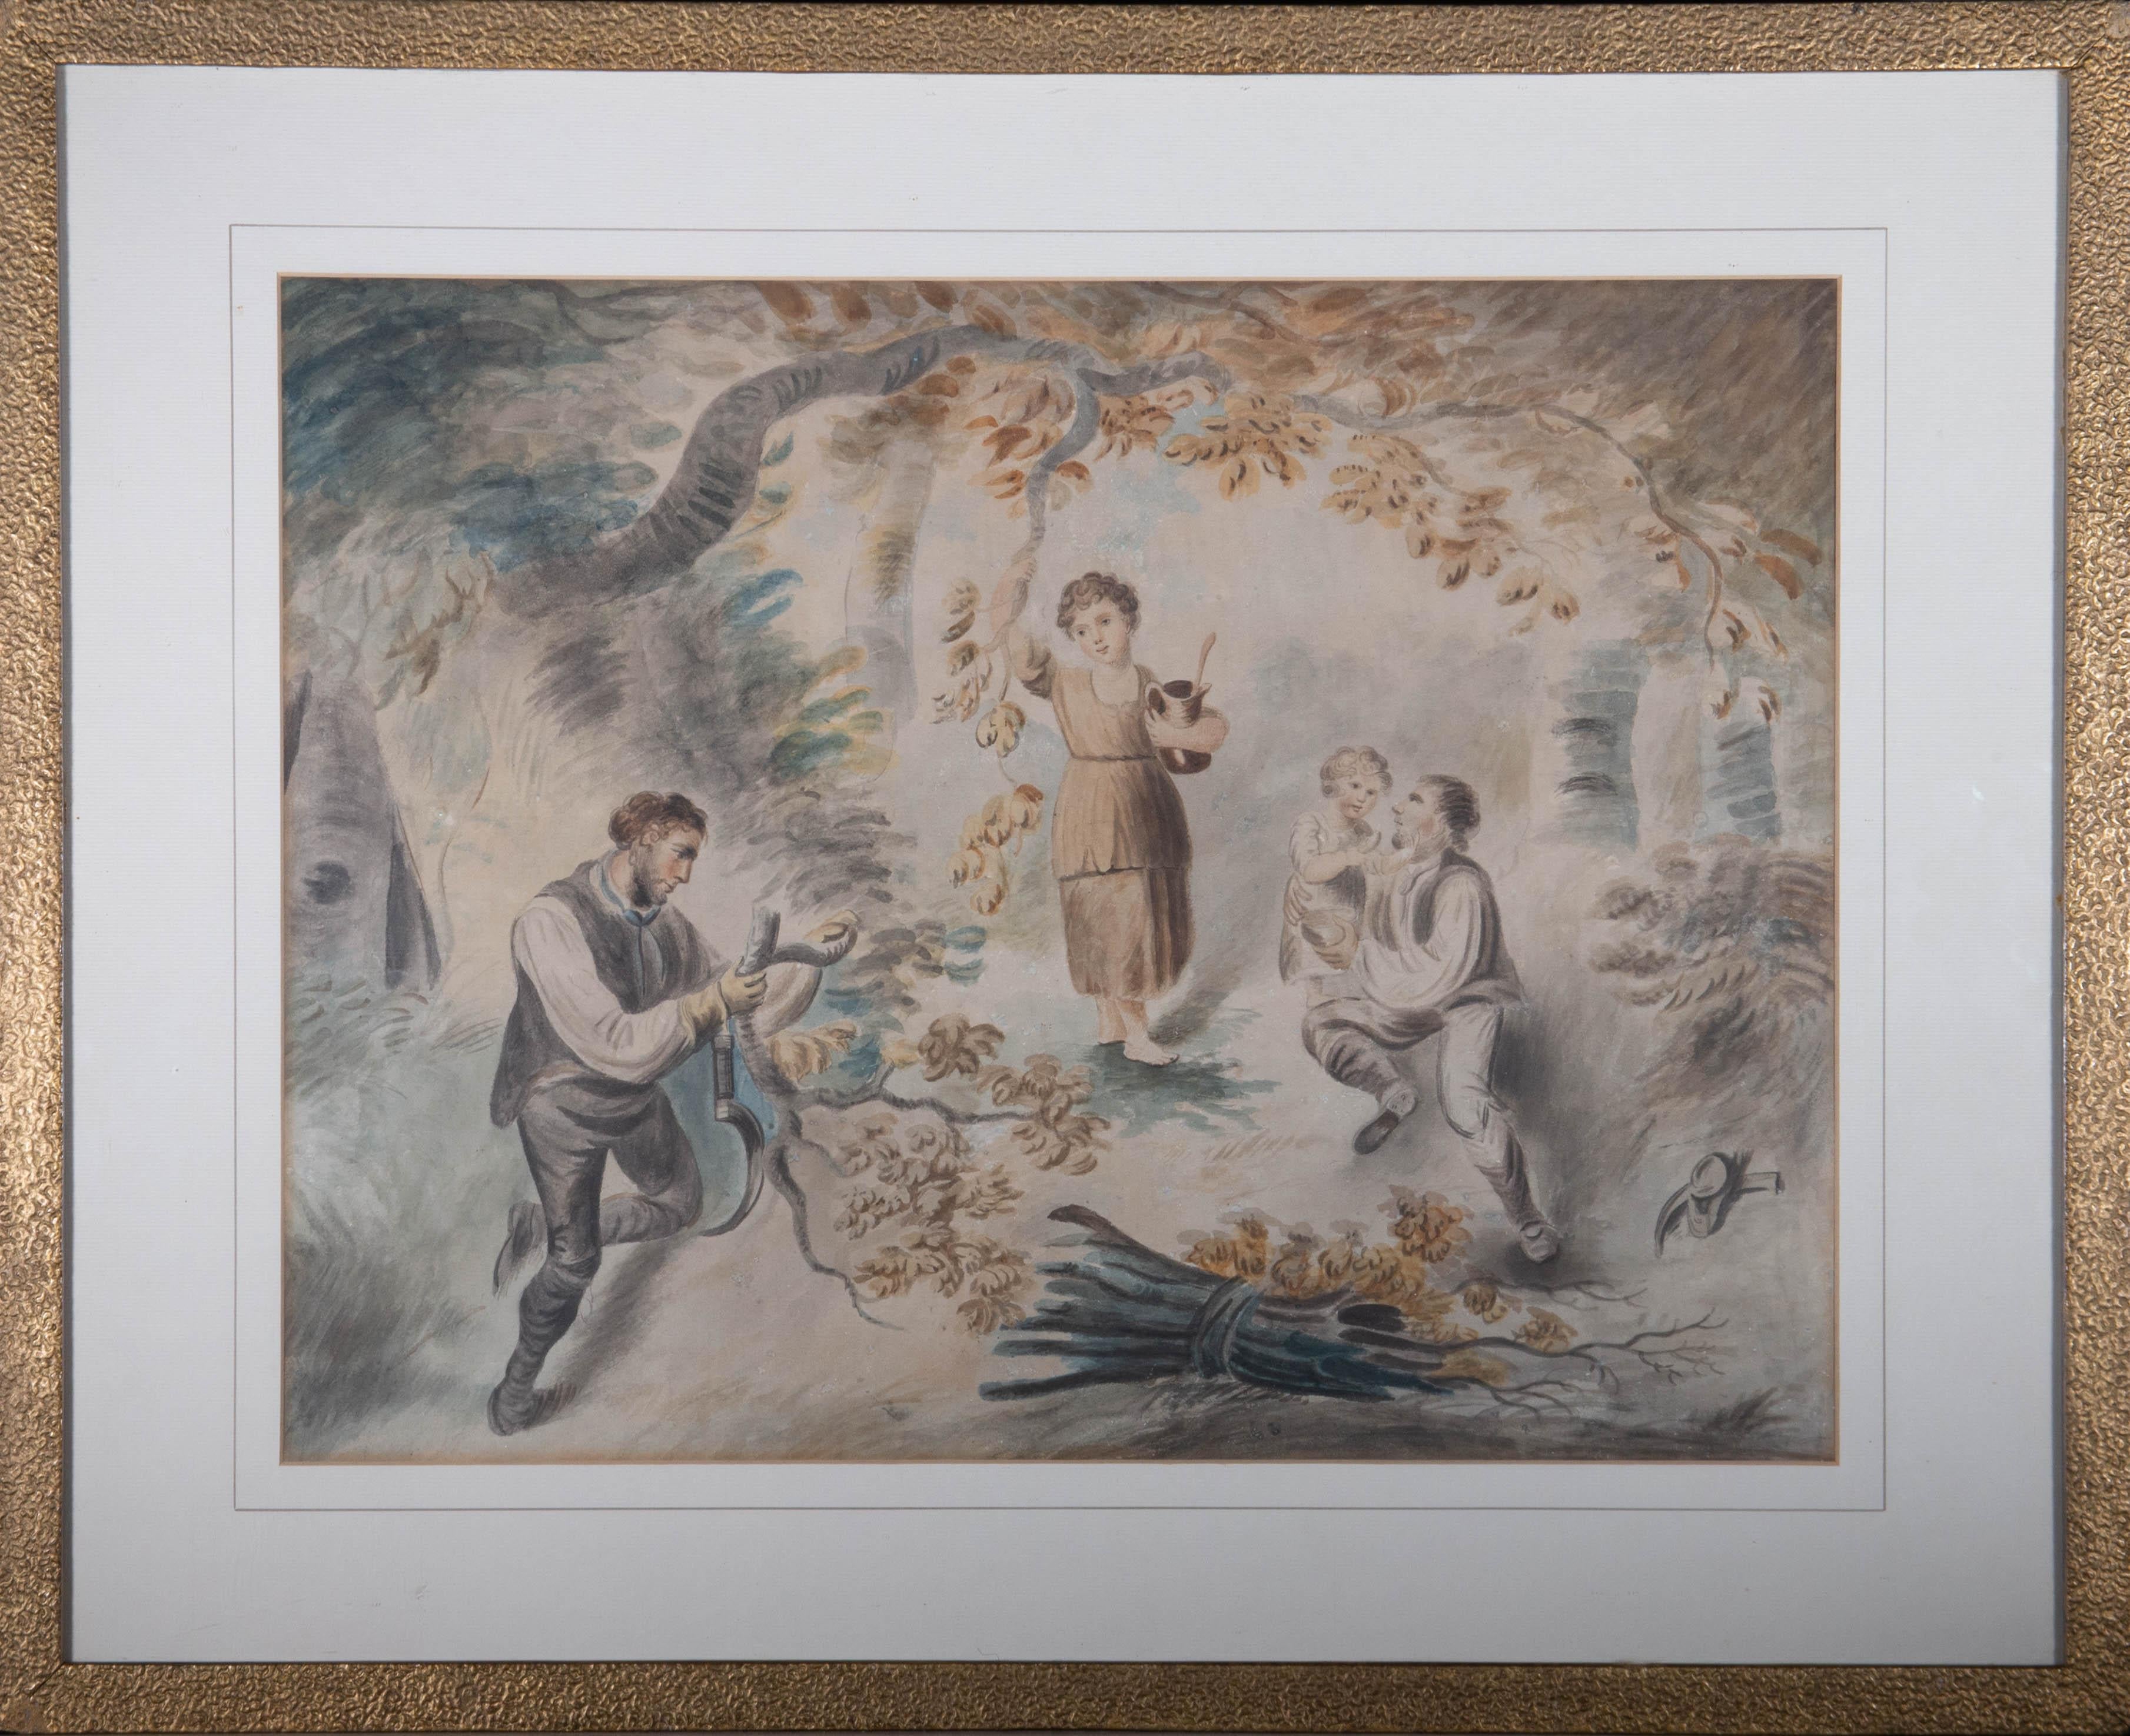 Unknown Figurative Art - Early 19th Century Watercolour - A Rural Scene with Villagers